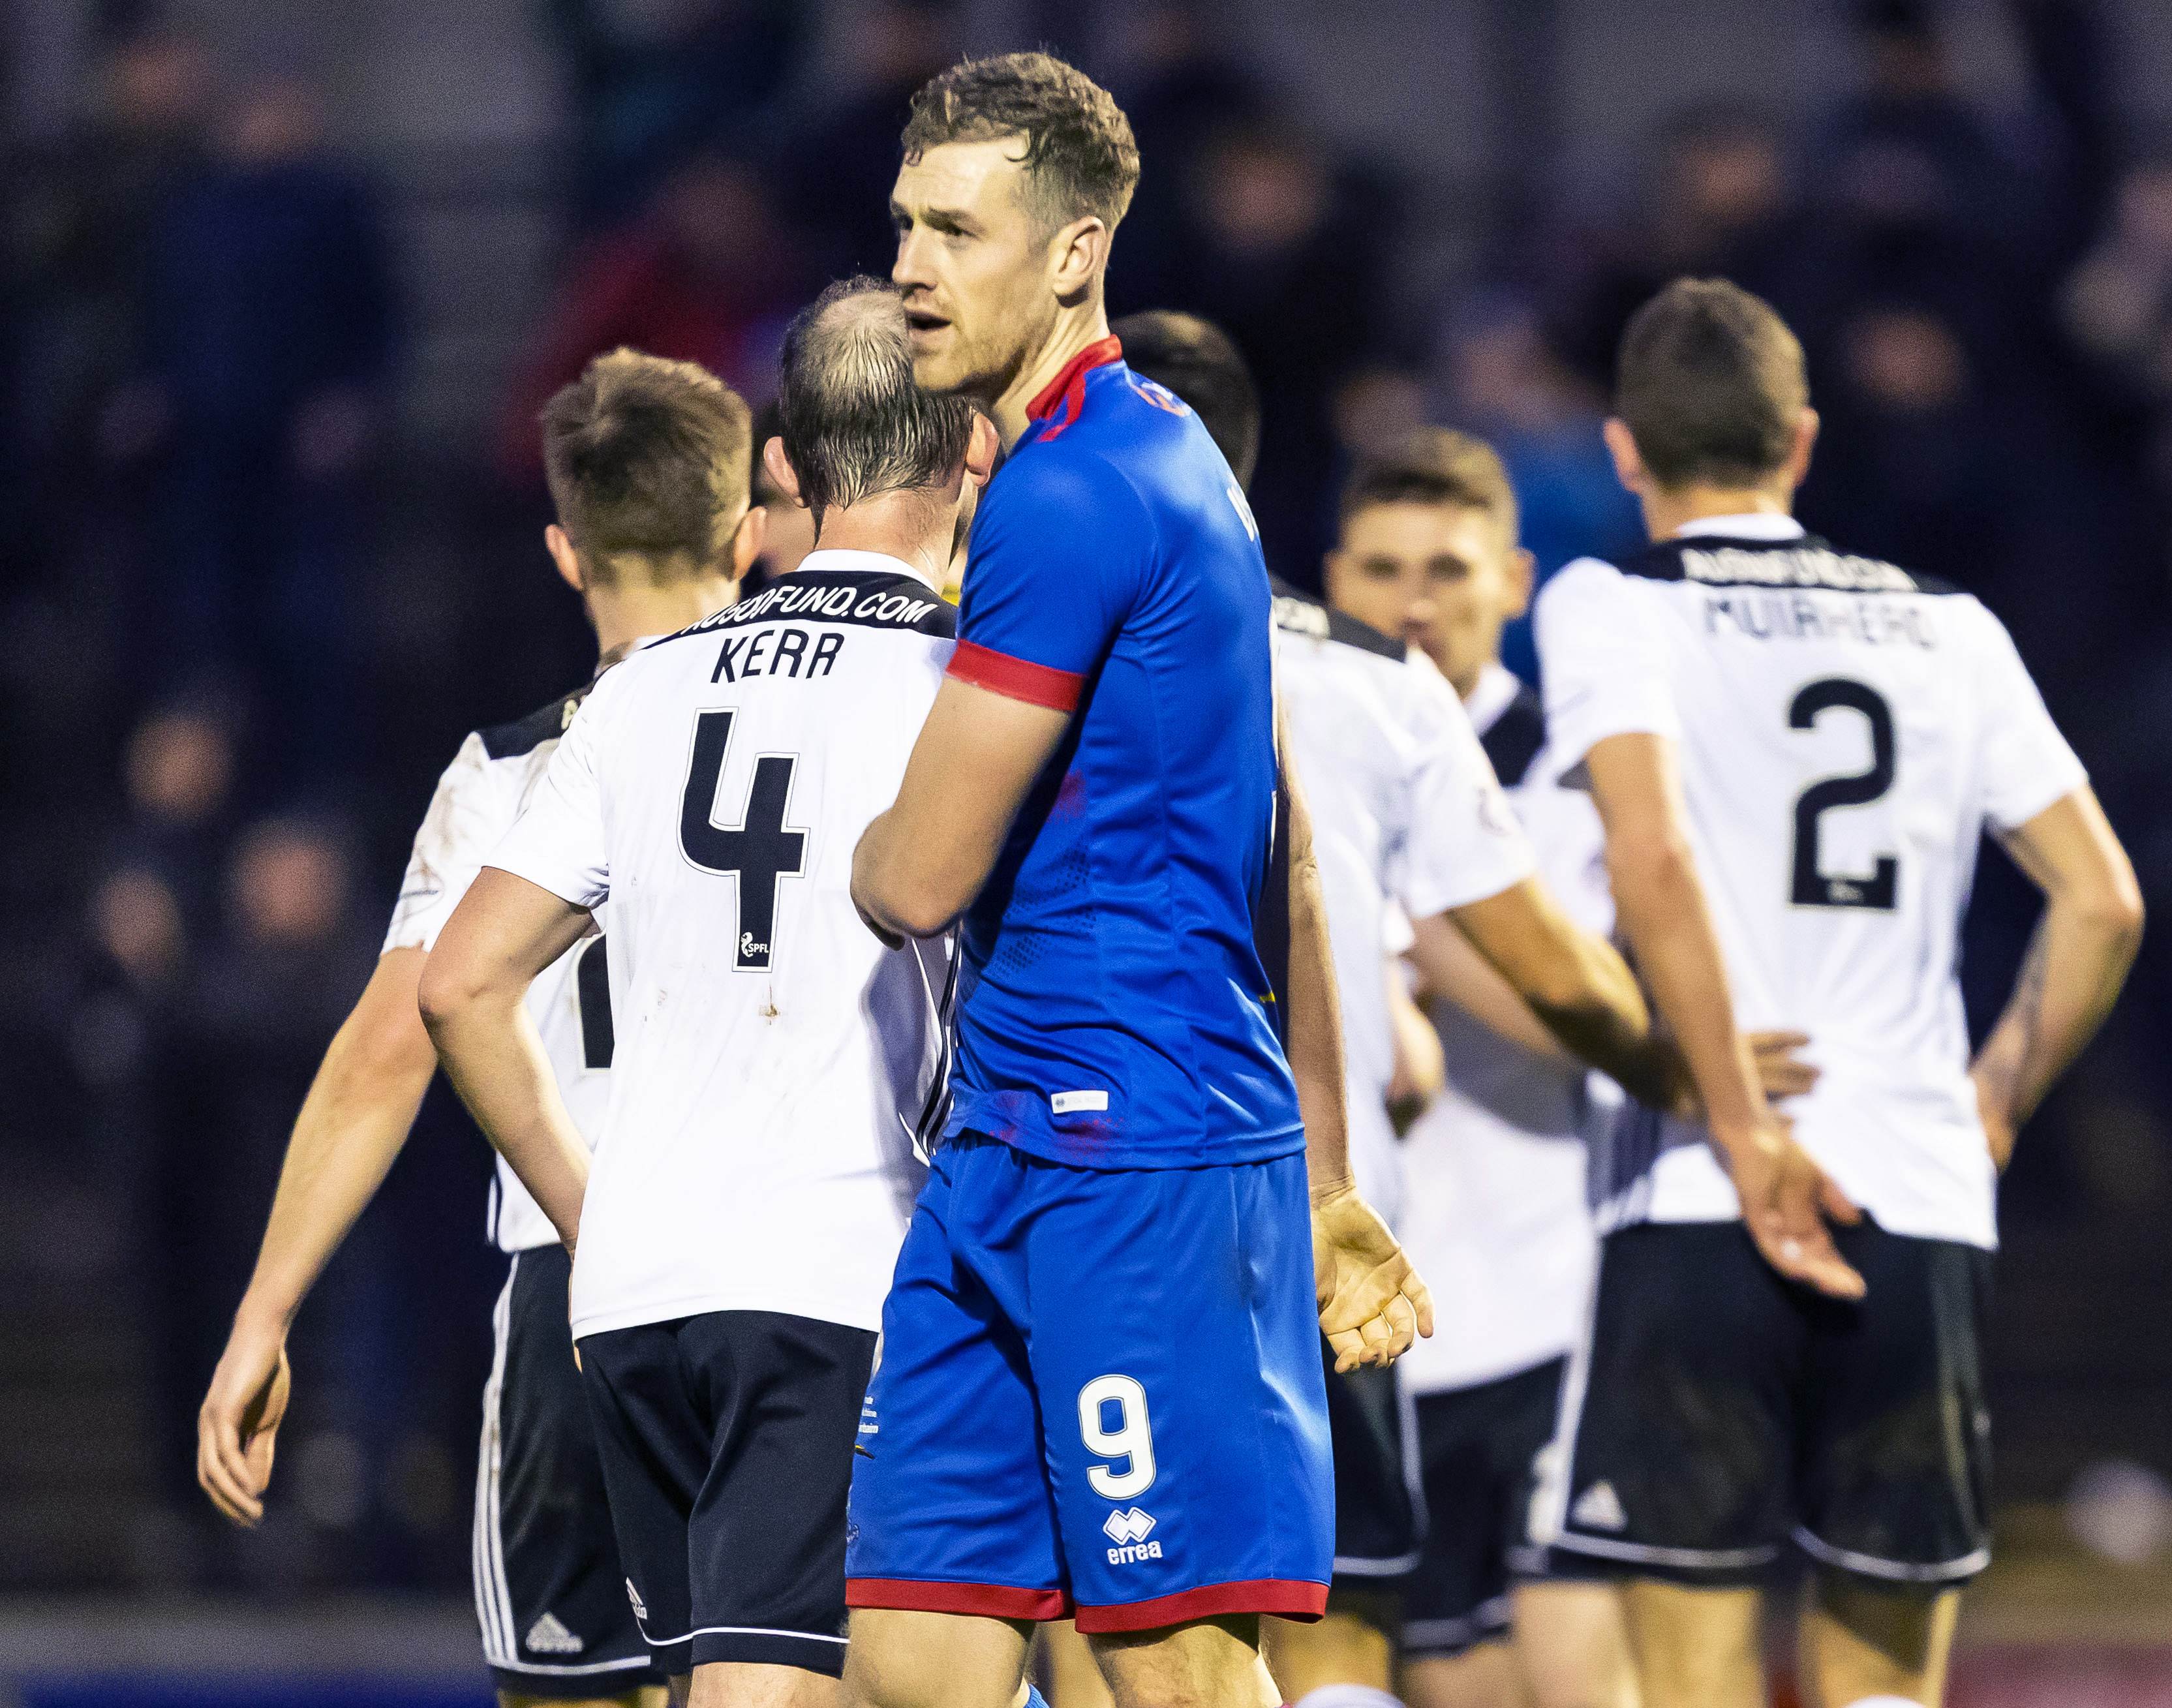 Jordan White at full-time during the Ladbrokes Championship match between Ayr United and Inverness Caledonian Thistle at Somerset Park.